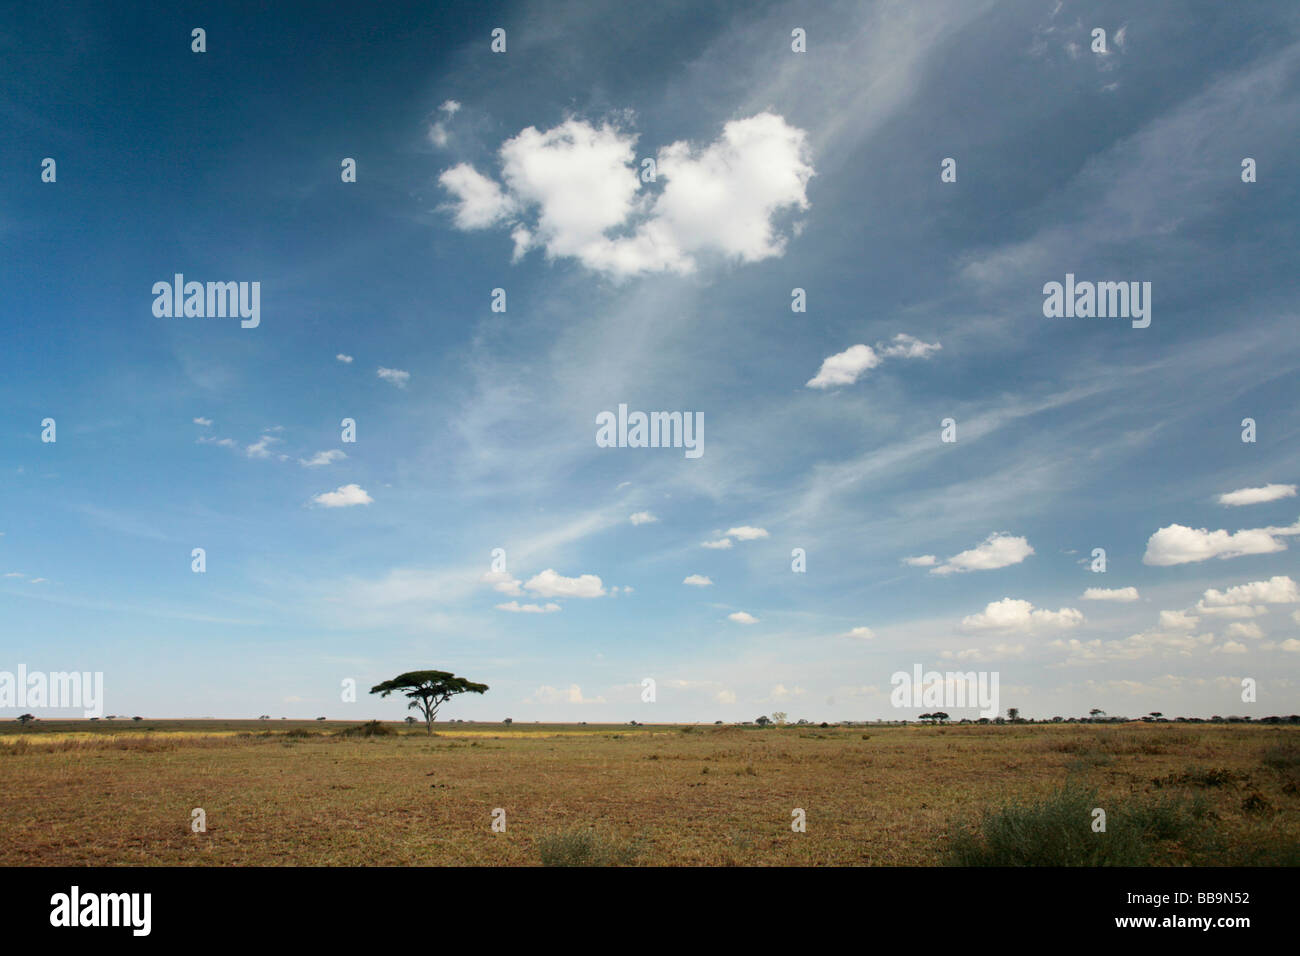 Single Acacia Tree in the Serengeti with a blue a blue sky and a nice cloud Stock Photo